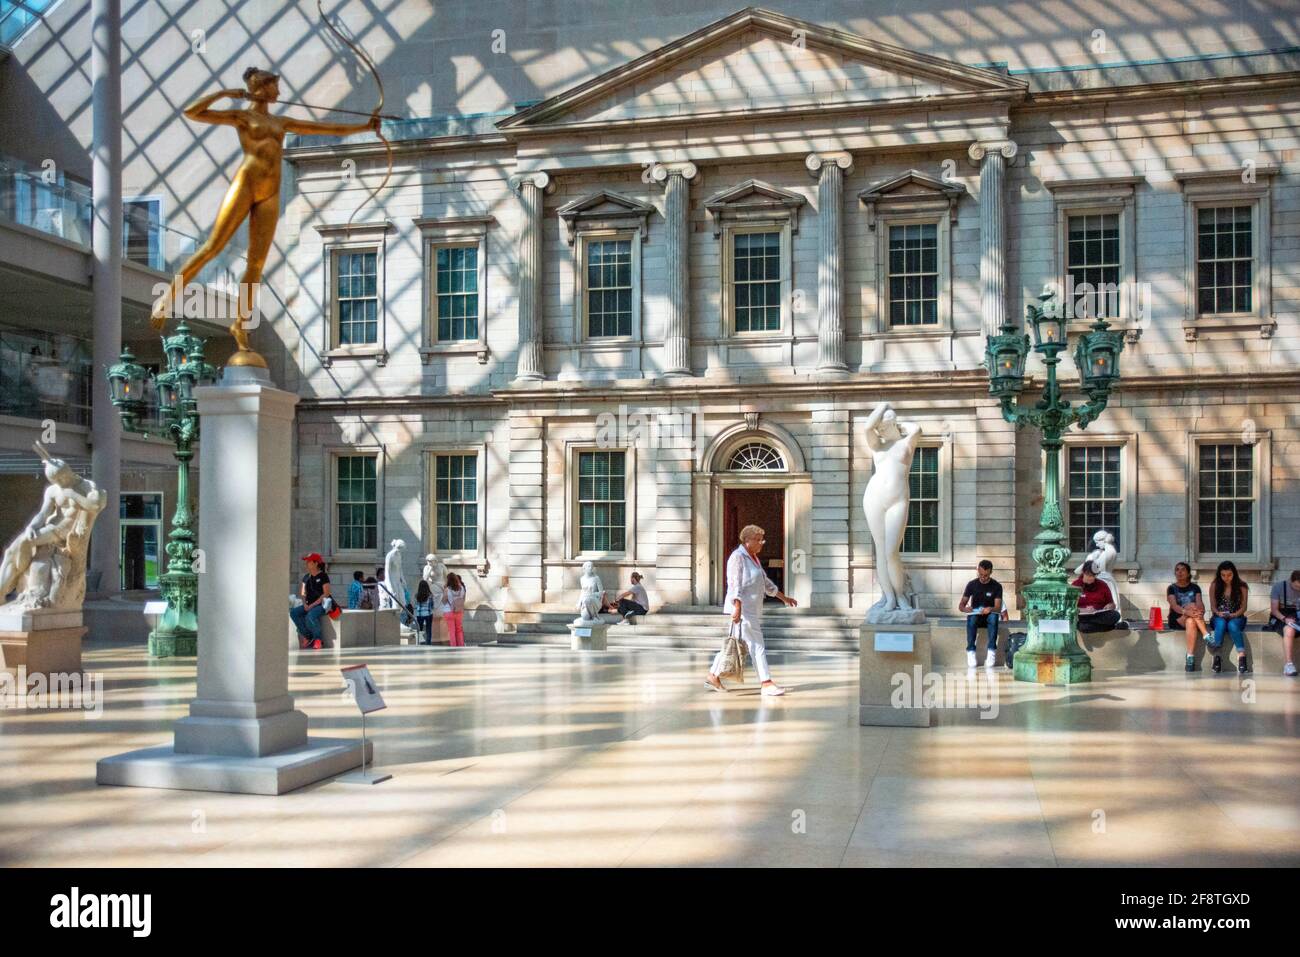 Courtyard of the American Wing, Metropolitan Museum of Art MET, Manhattan, New York City, USA, North America. Sculptures of The Charles Engelhard Cour Stock Photo